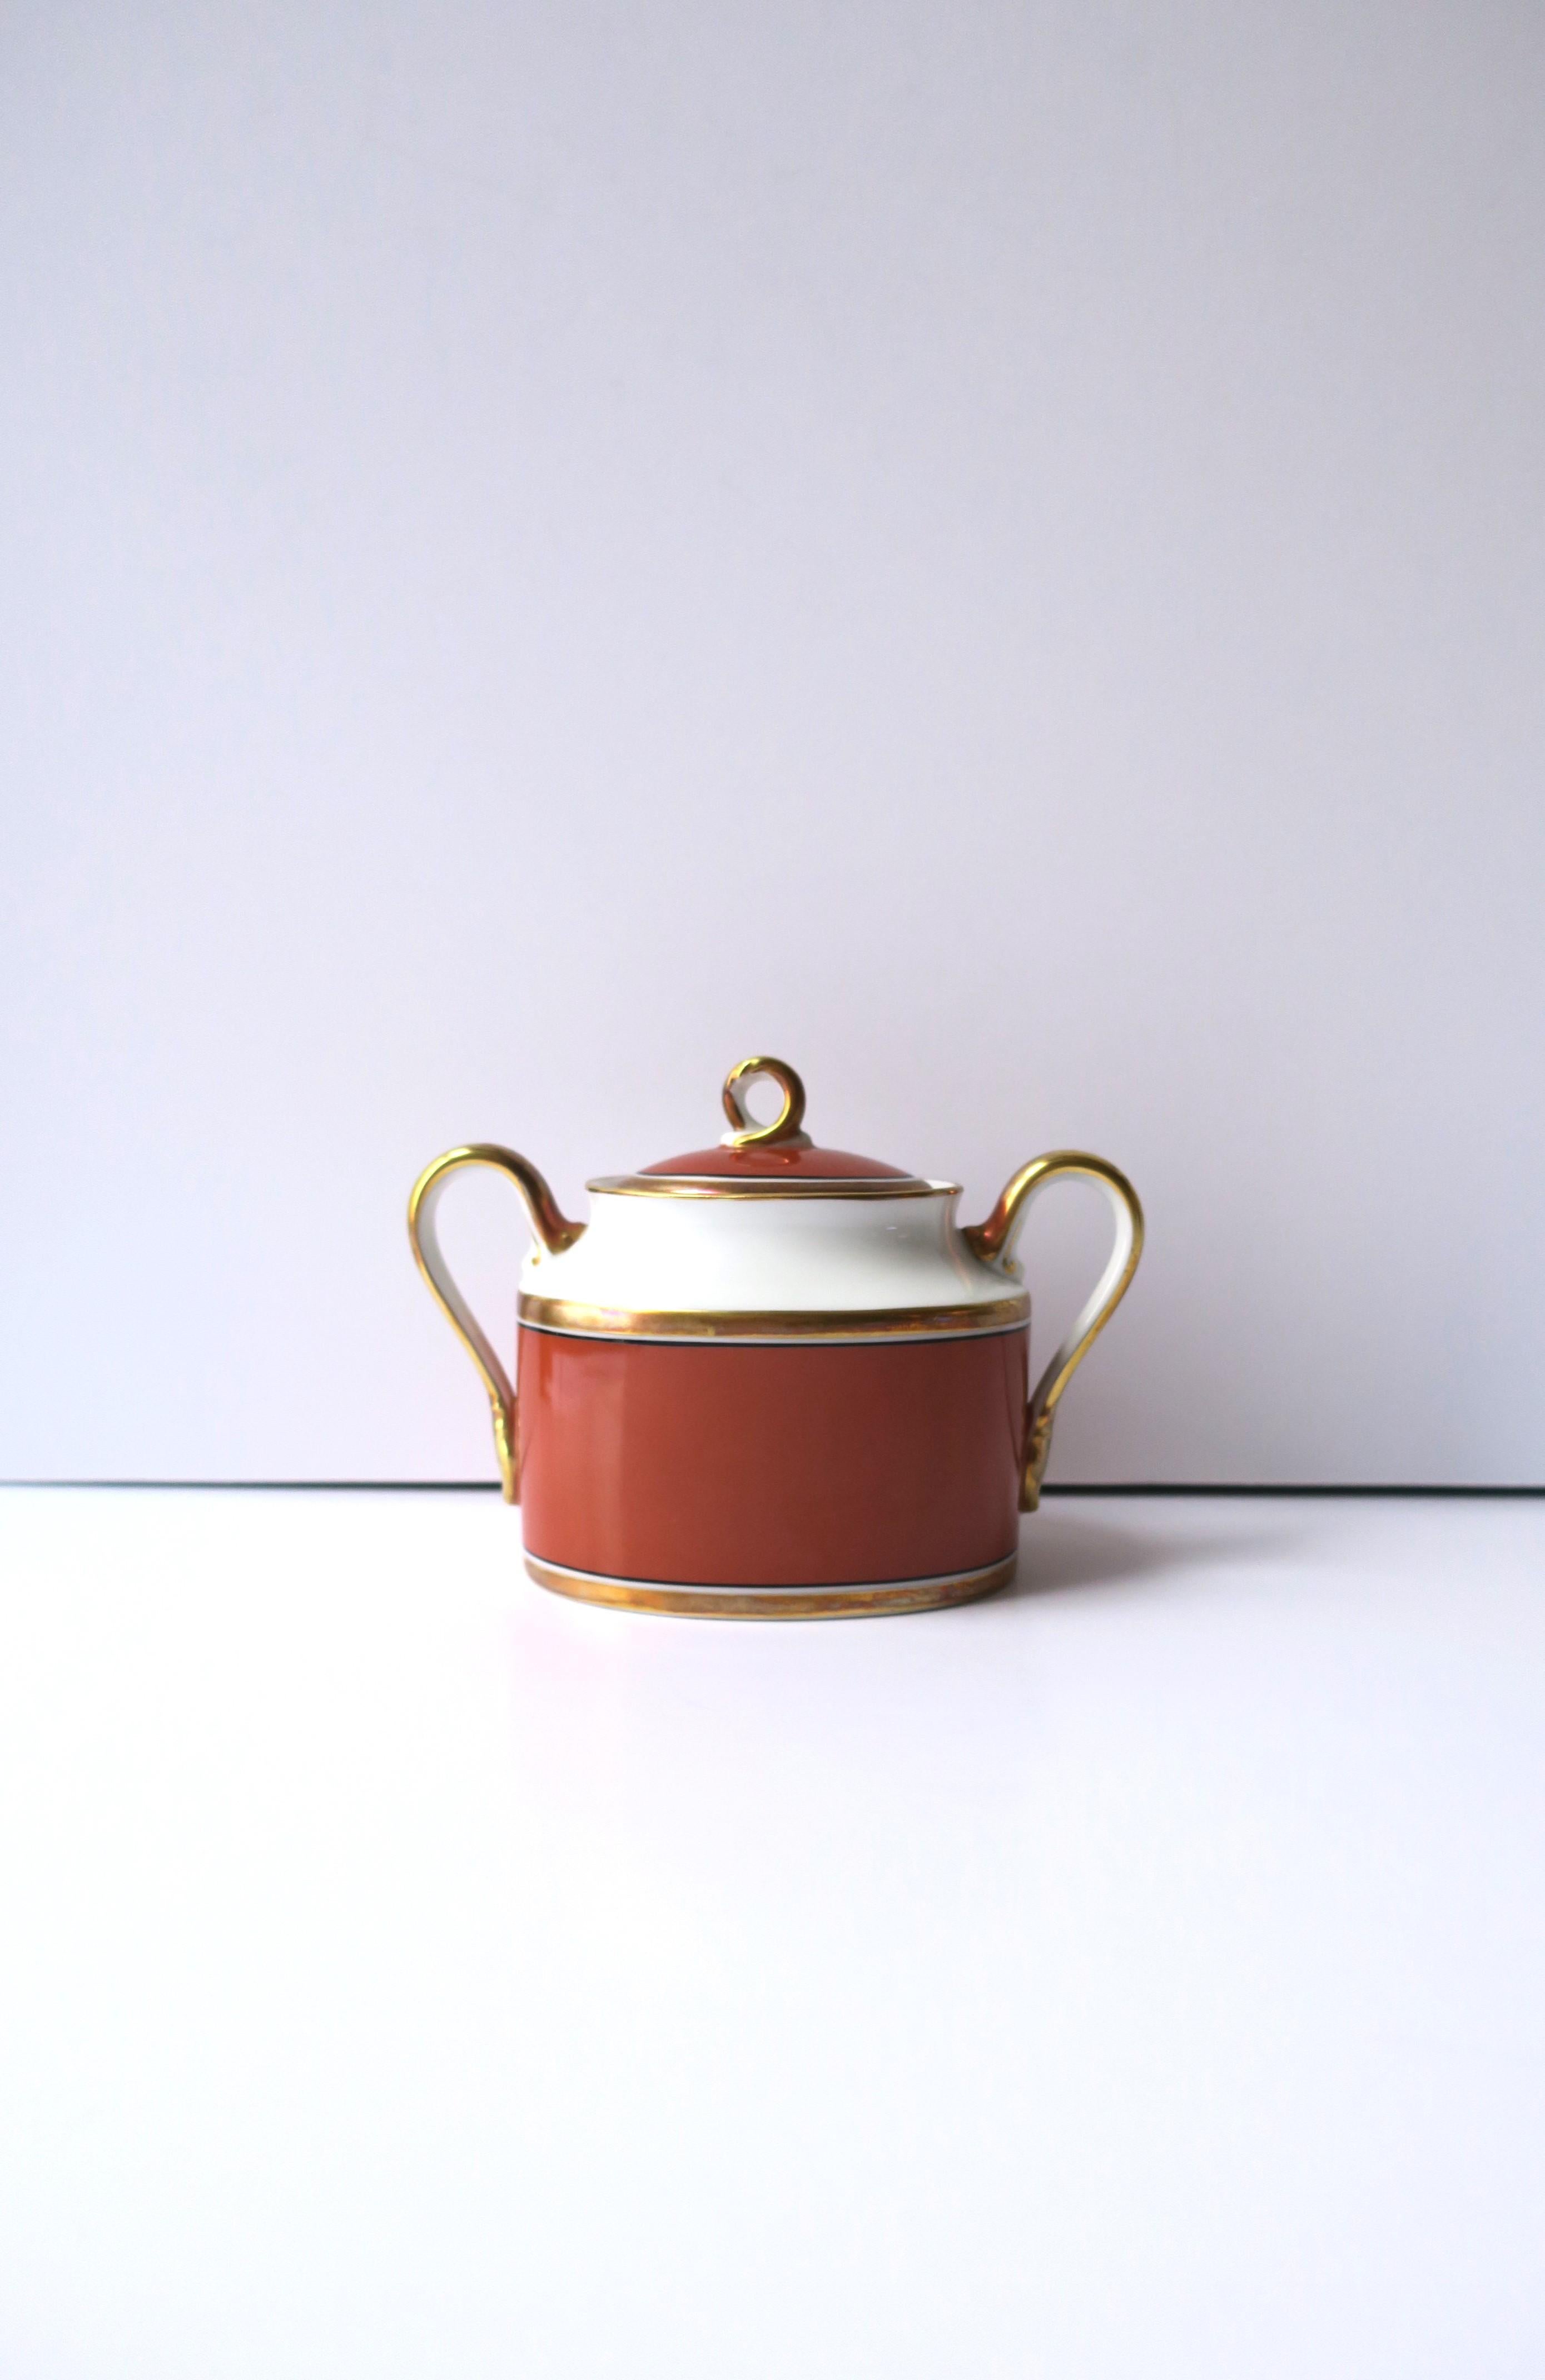 A vintage Italian Richard Ginori 'Contessa' gold and terracotta rust-red porcelain sugar bowl and lid, circa late-20th century, Italy. Piece is hand decorated with gold band detail around lid rim, center and base, and on handles. This 'Contessa'